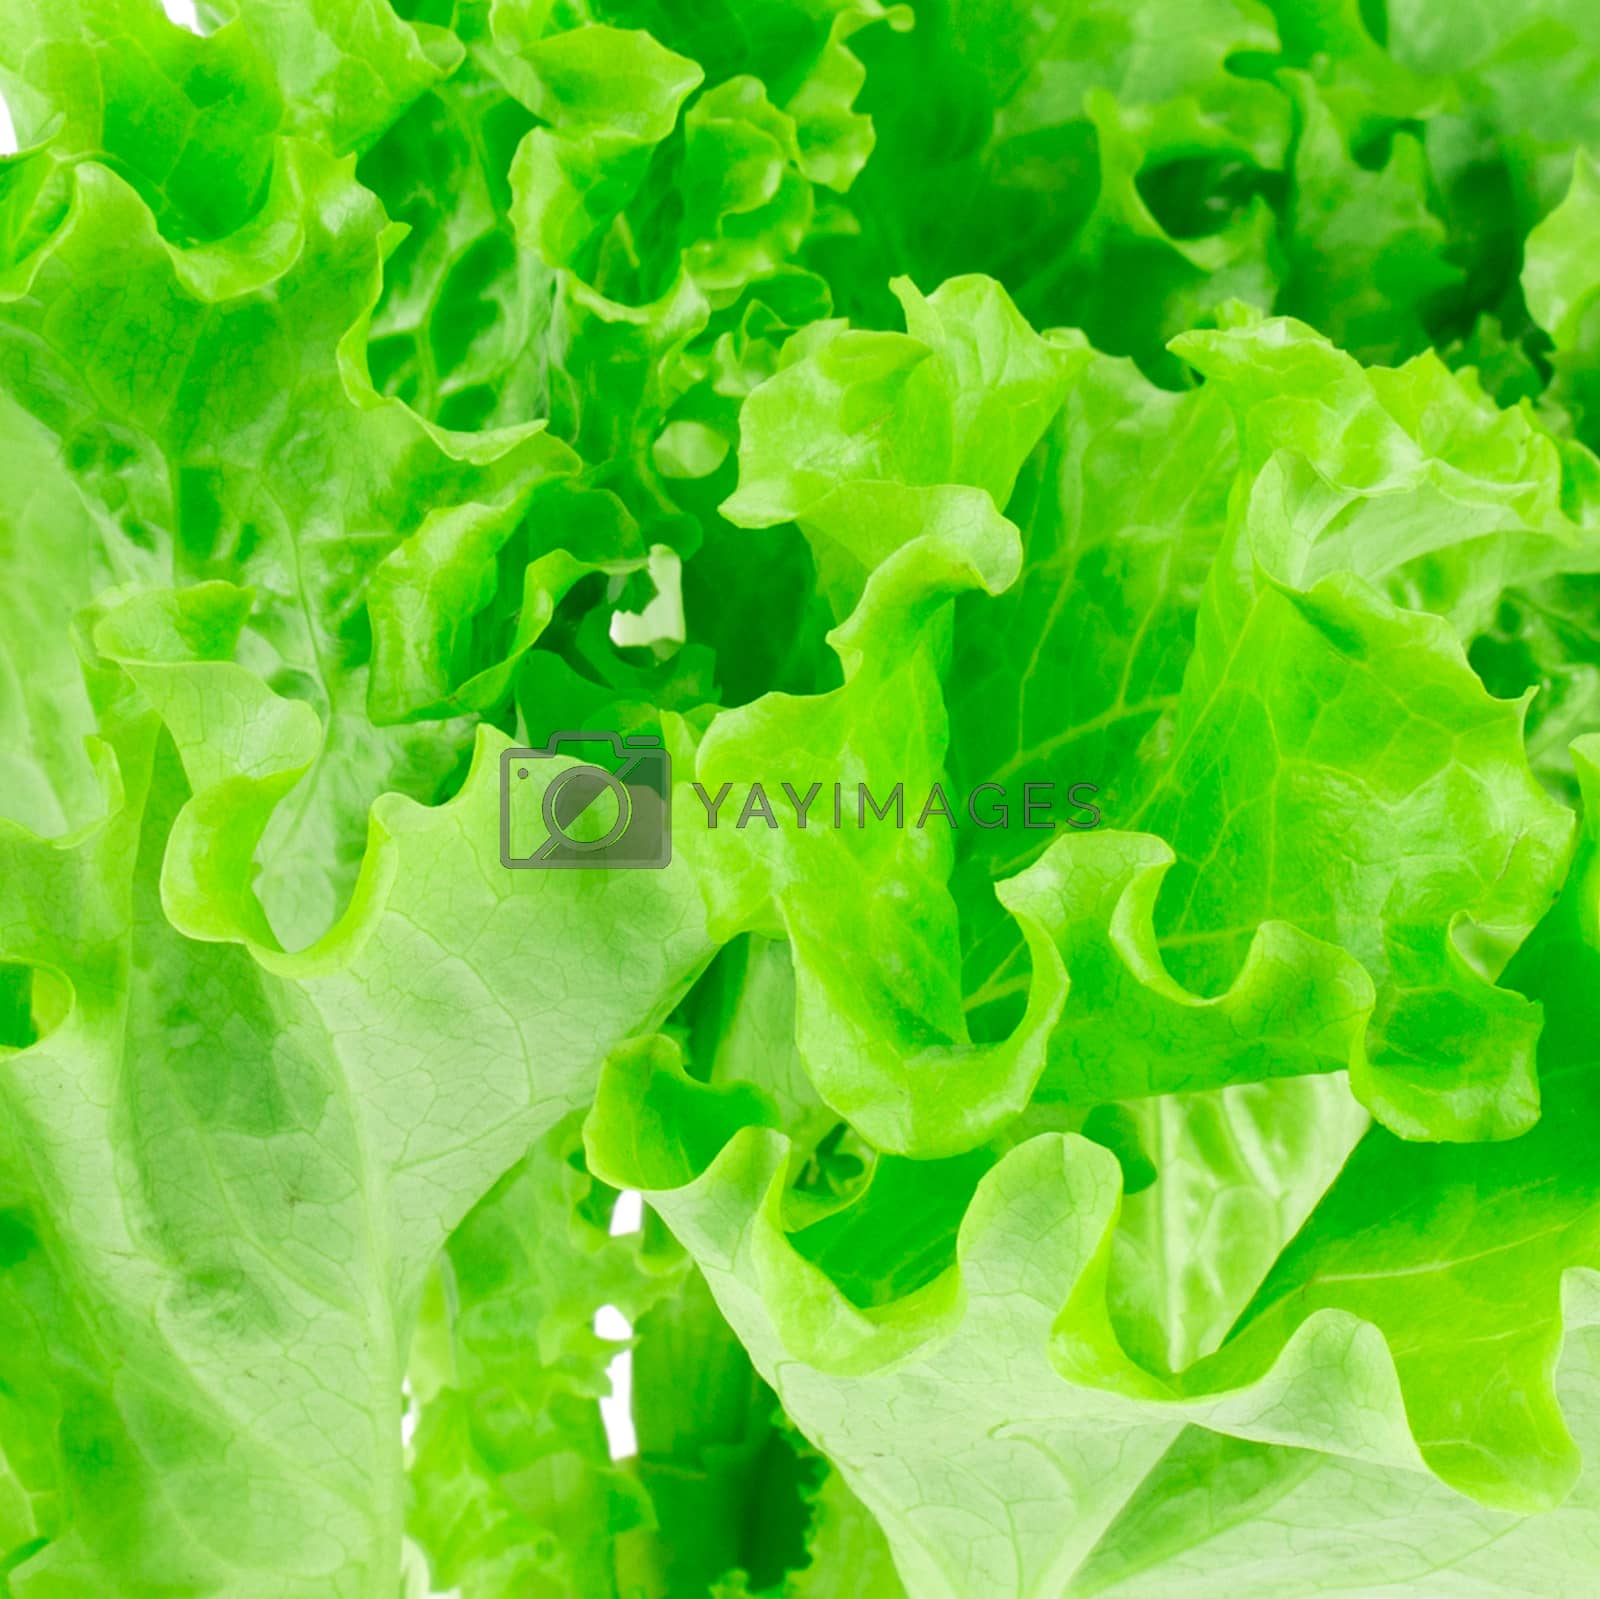 Royalty free image of lettuce leaves on a white background by ozaiachin